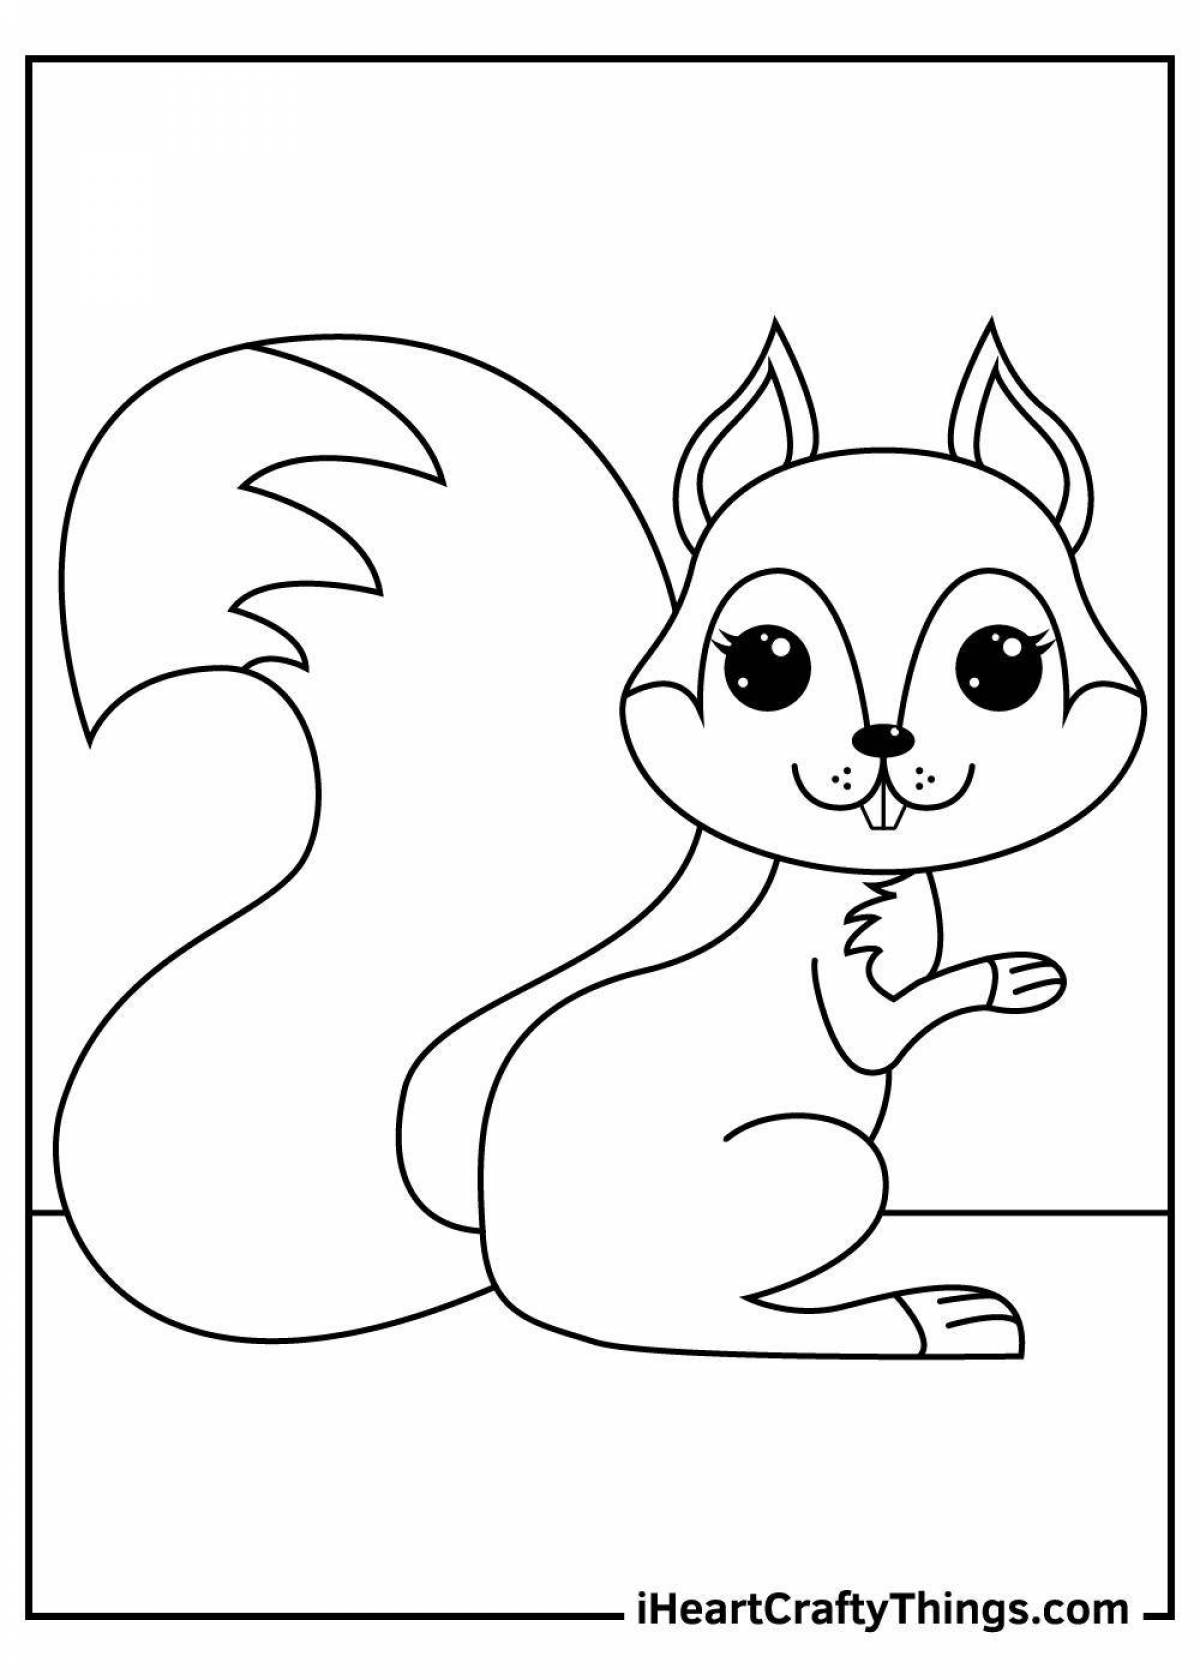 Little squirrel coloring book